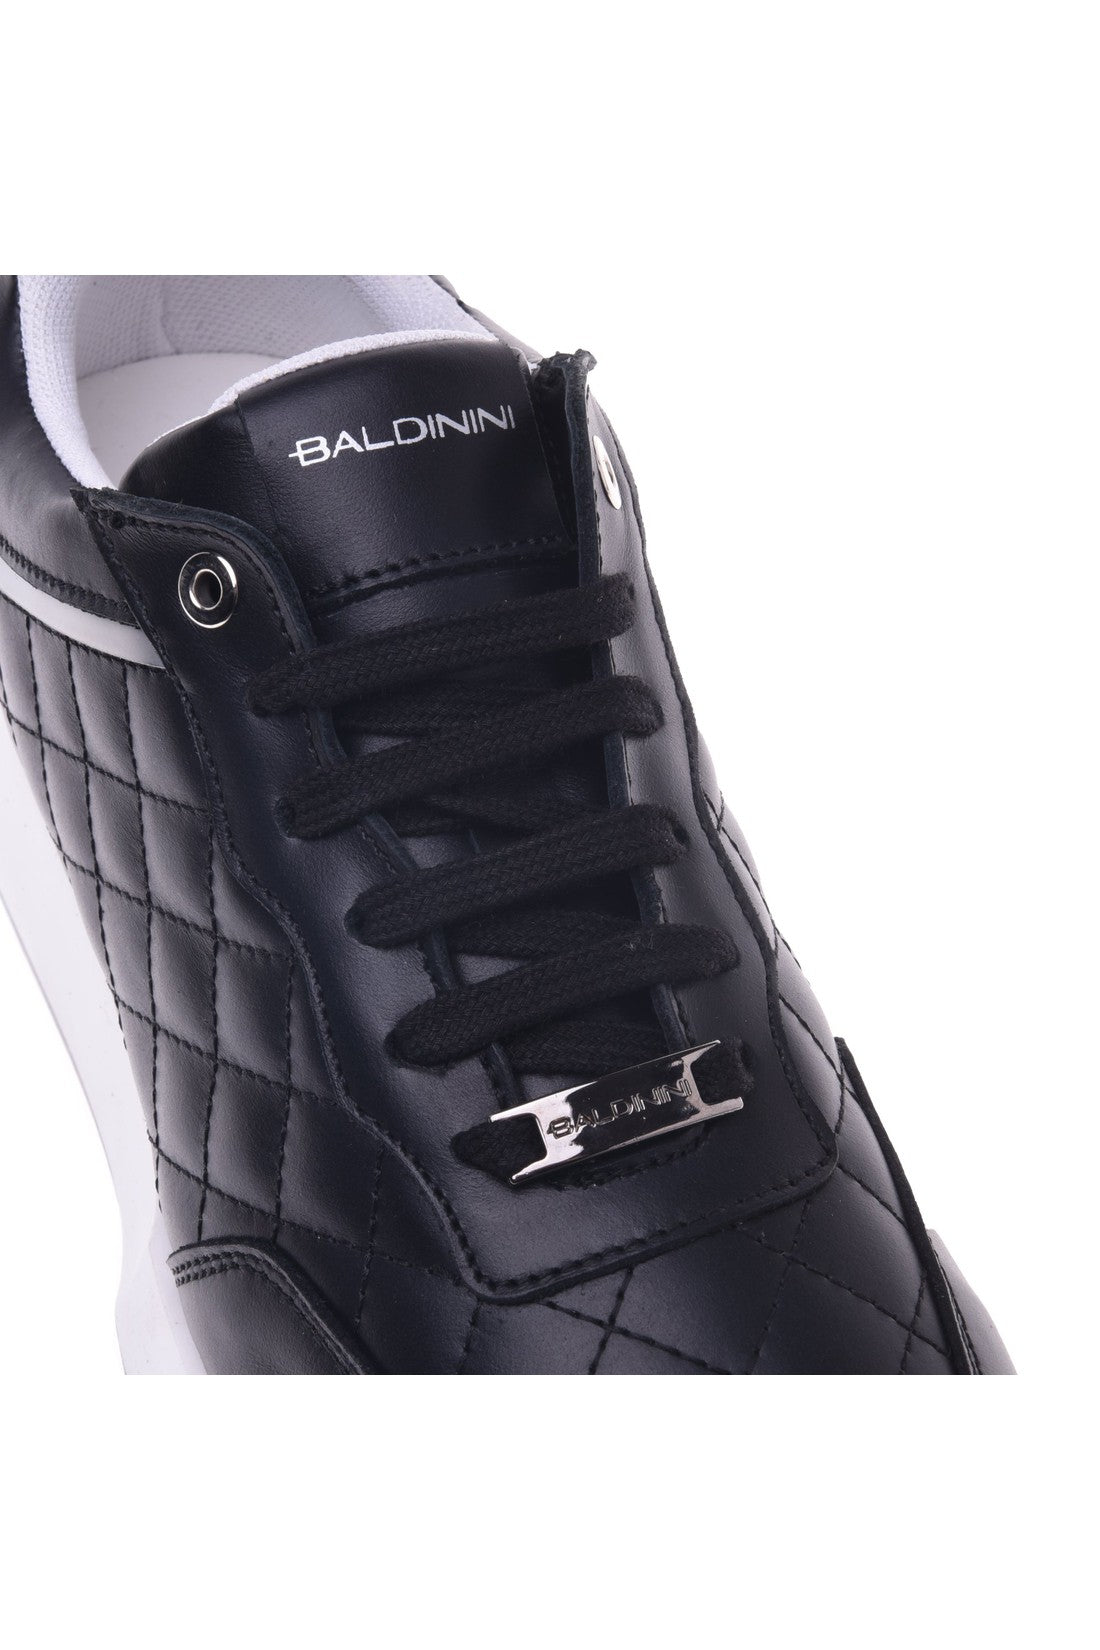 BALDININI-OUTLET-SALE-Sneaker-in-black-quilted-leather-Sneaker-ARCHIVE-COLLECTION-4.jpg